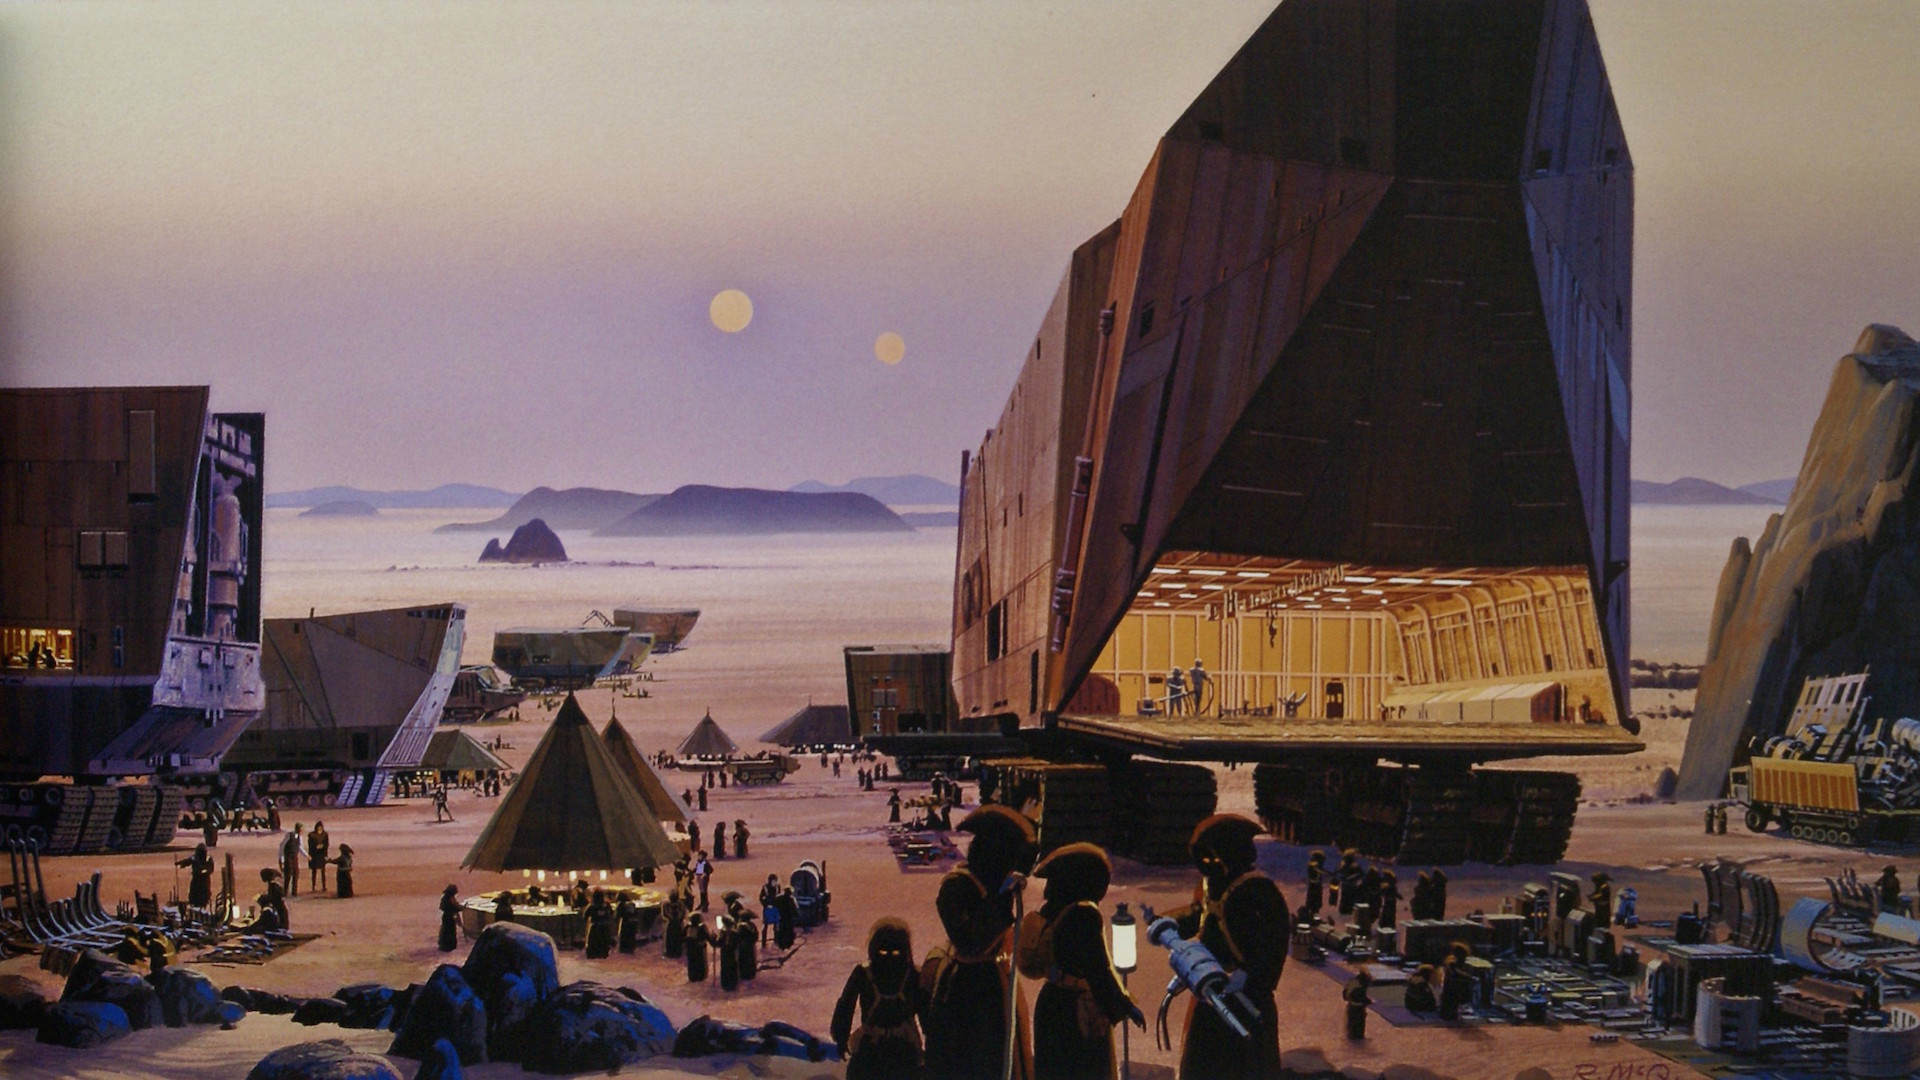 Some of my favourite Ralph McQuarrie Star Wars concept art wallpaper